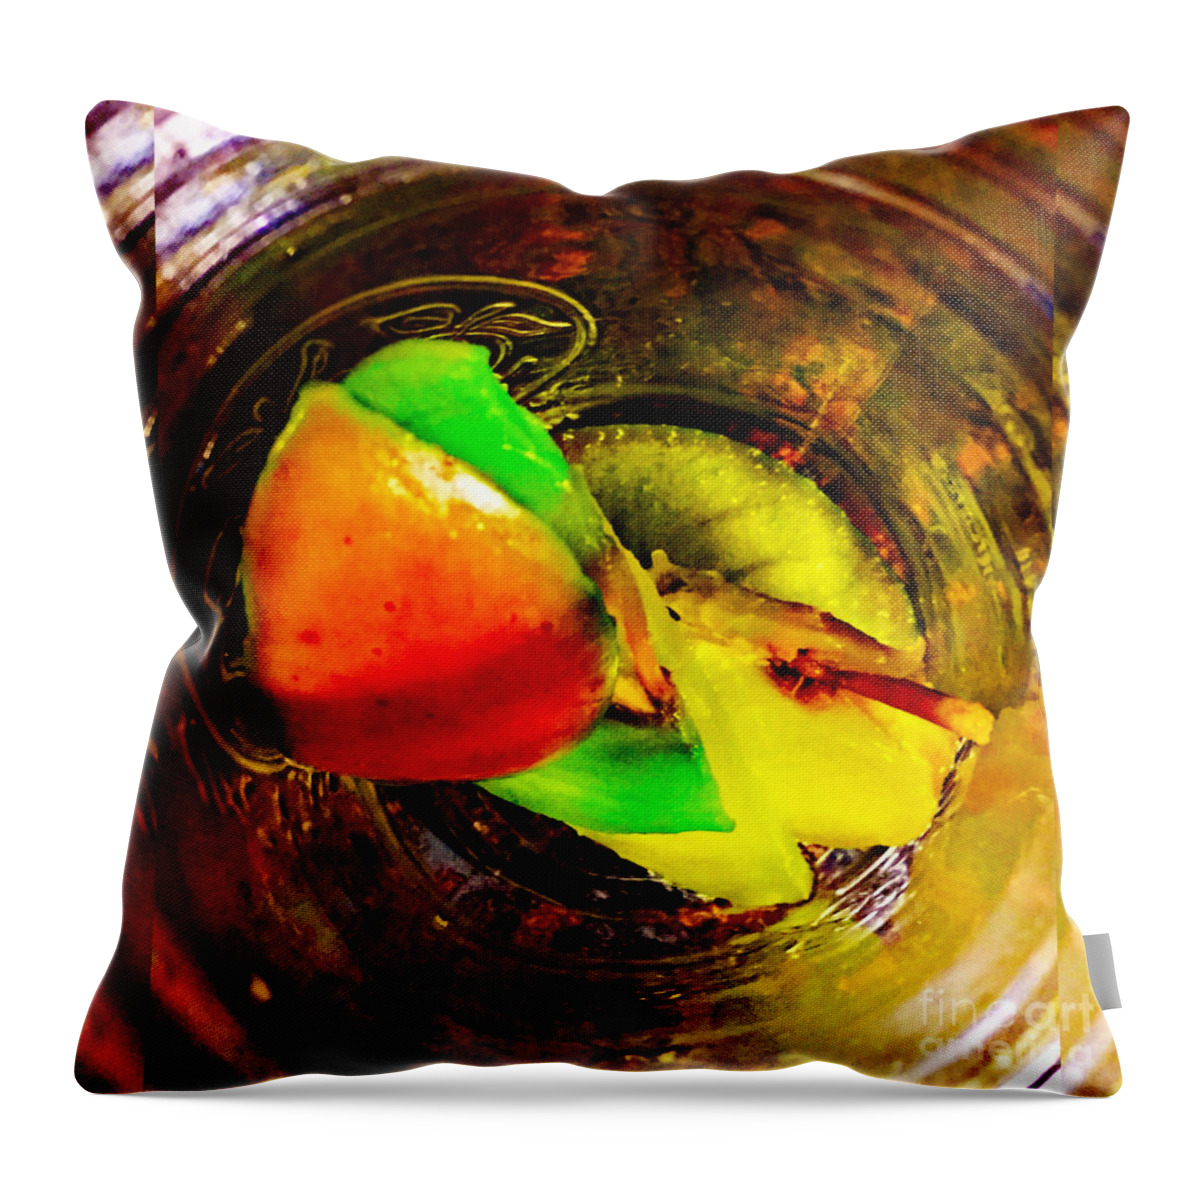 Photograph Fruit In Glass Throw Pillow featuring the digital art Bottom of the Jar by Gayle Price Thomas